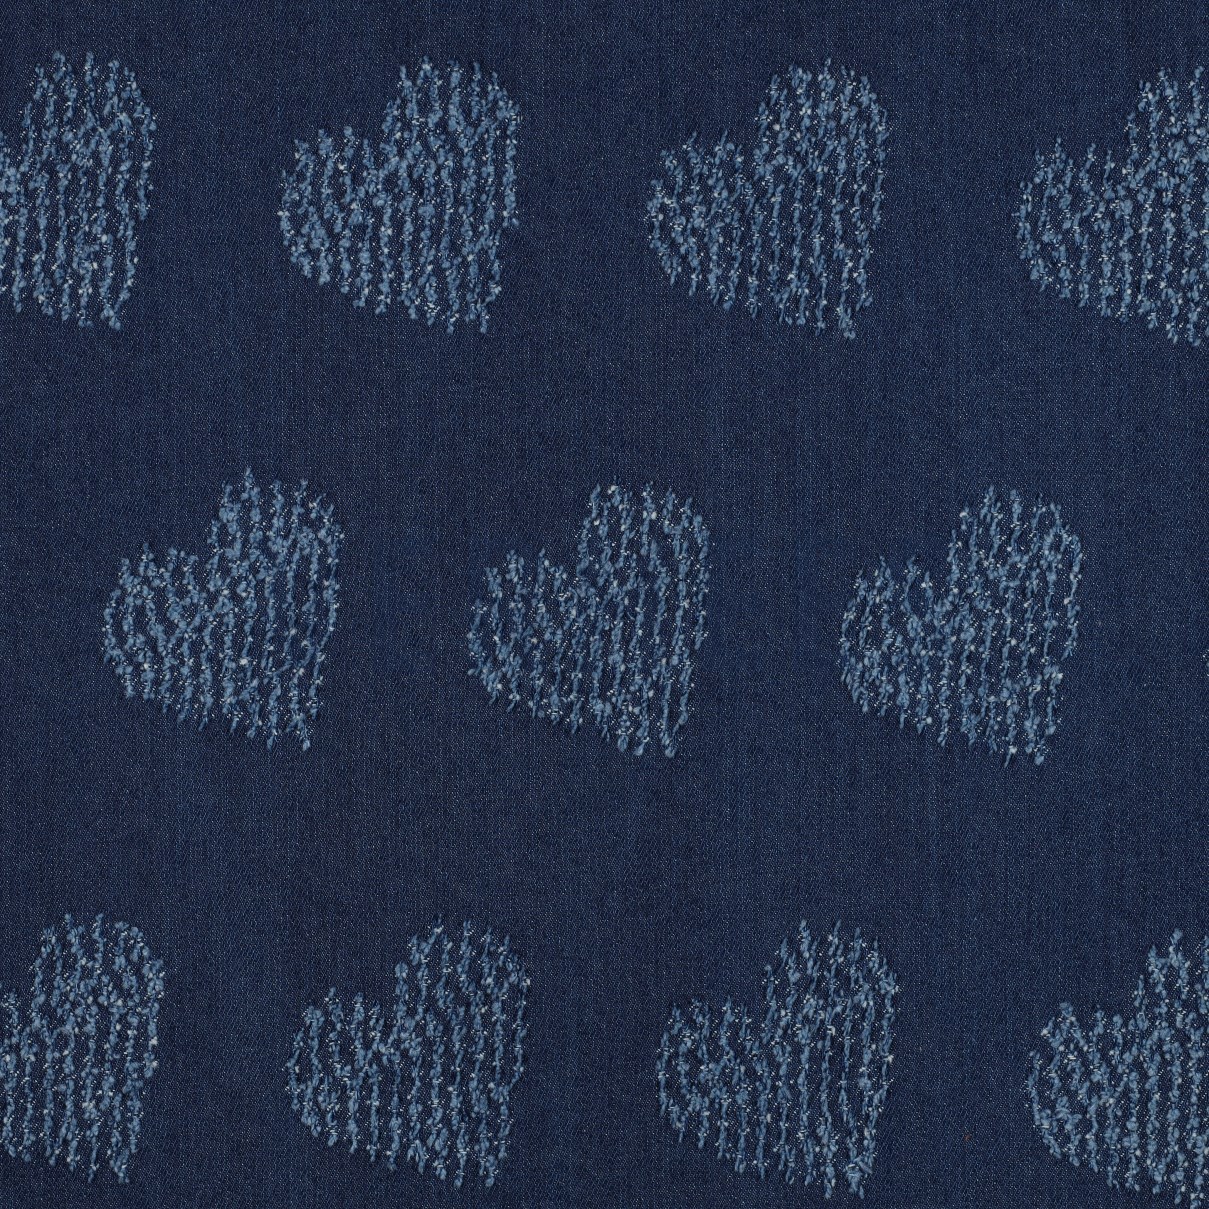 JEANS JACQUARD HEARTS JEANS (high resolution)